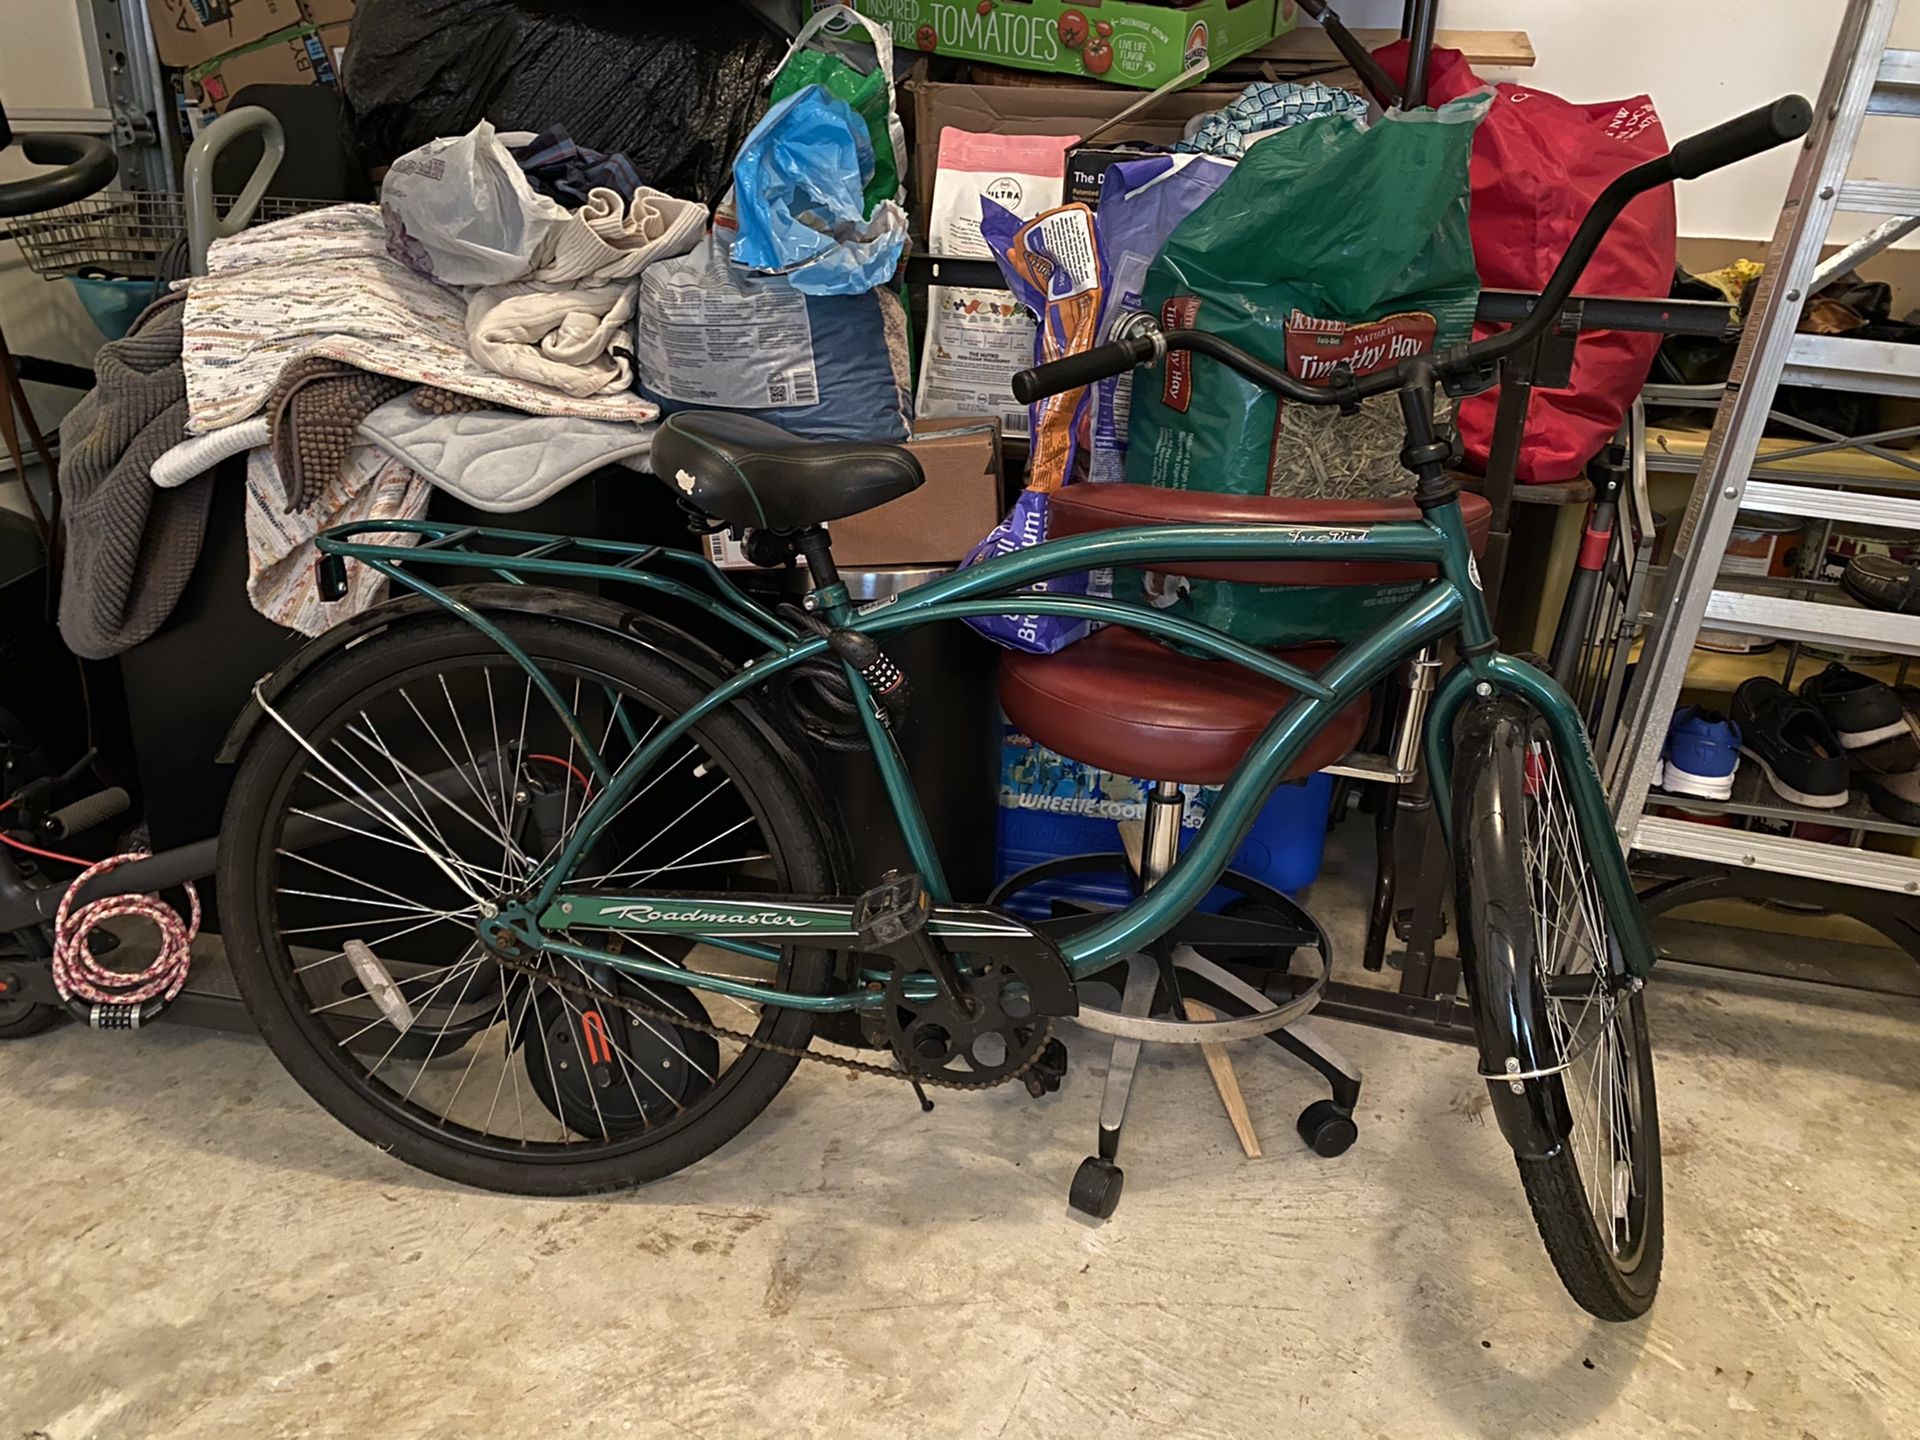 Used cruise bike-Good condition